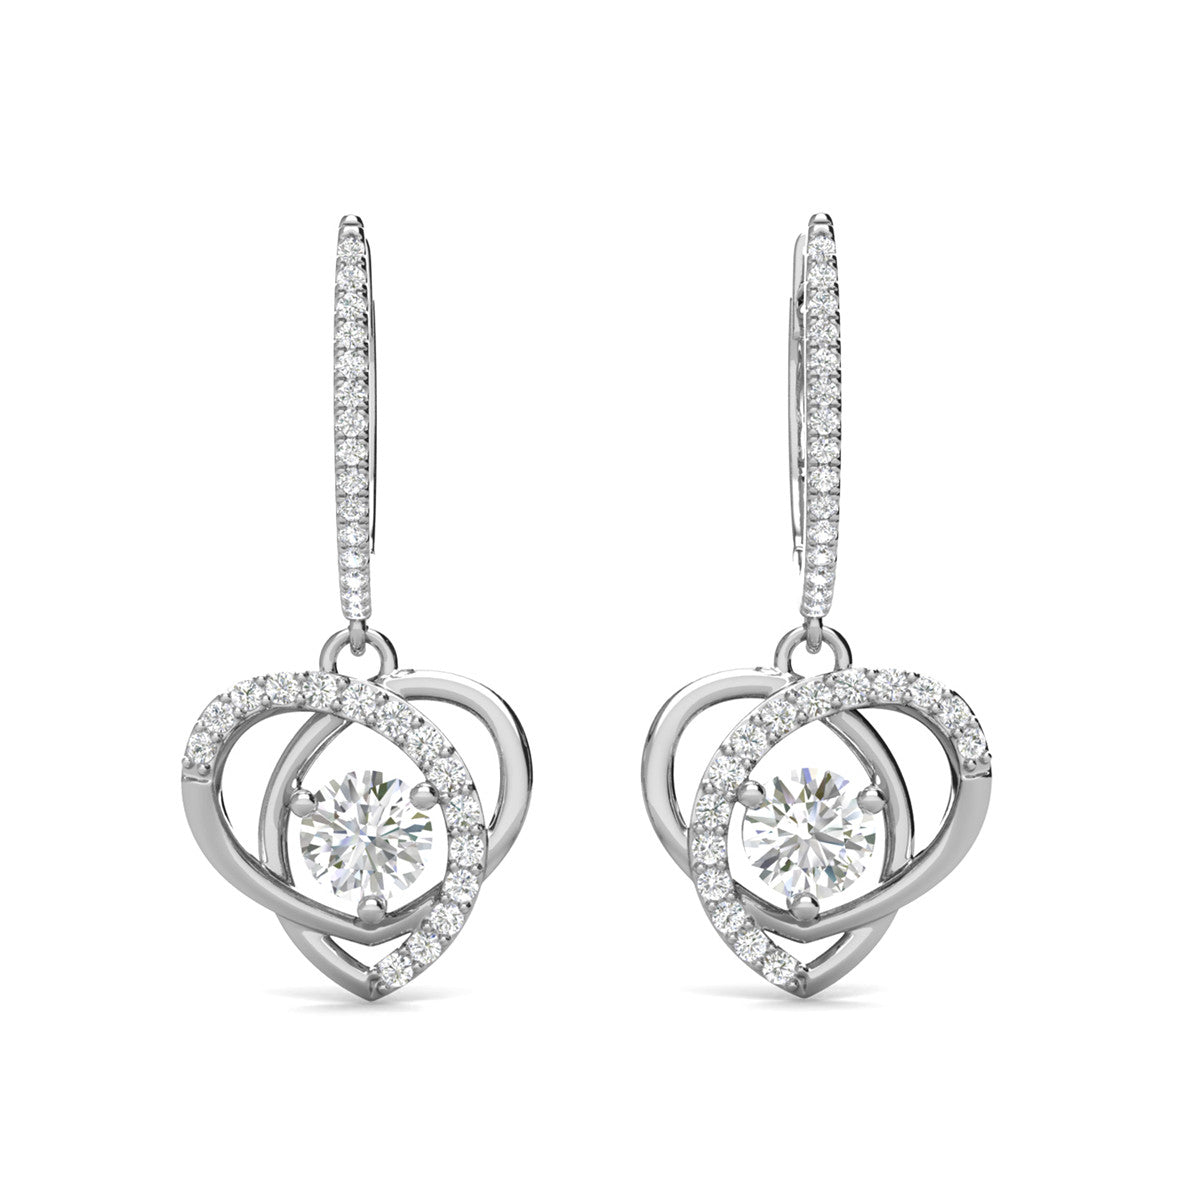 Moissanite by Cate & Chloe Naomi Sterling Silver Drop Earrings with Moissanite and 5A Cubic Zirconia Crystals